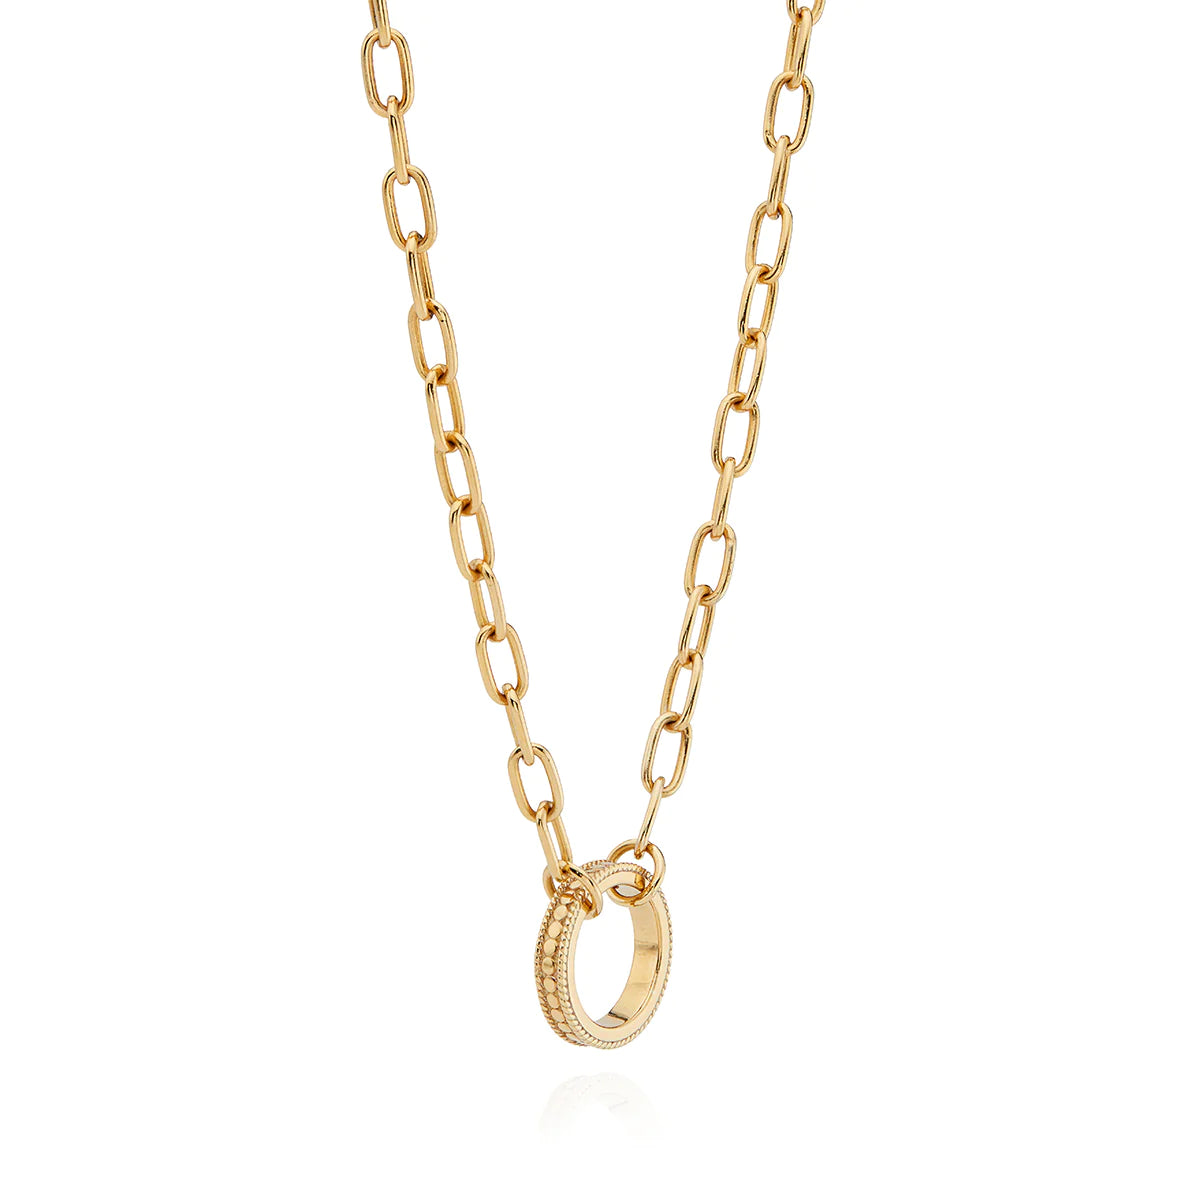 Gold Sterling silver plated necklace with open link chain and a circle charm